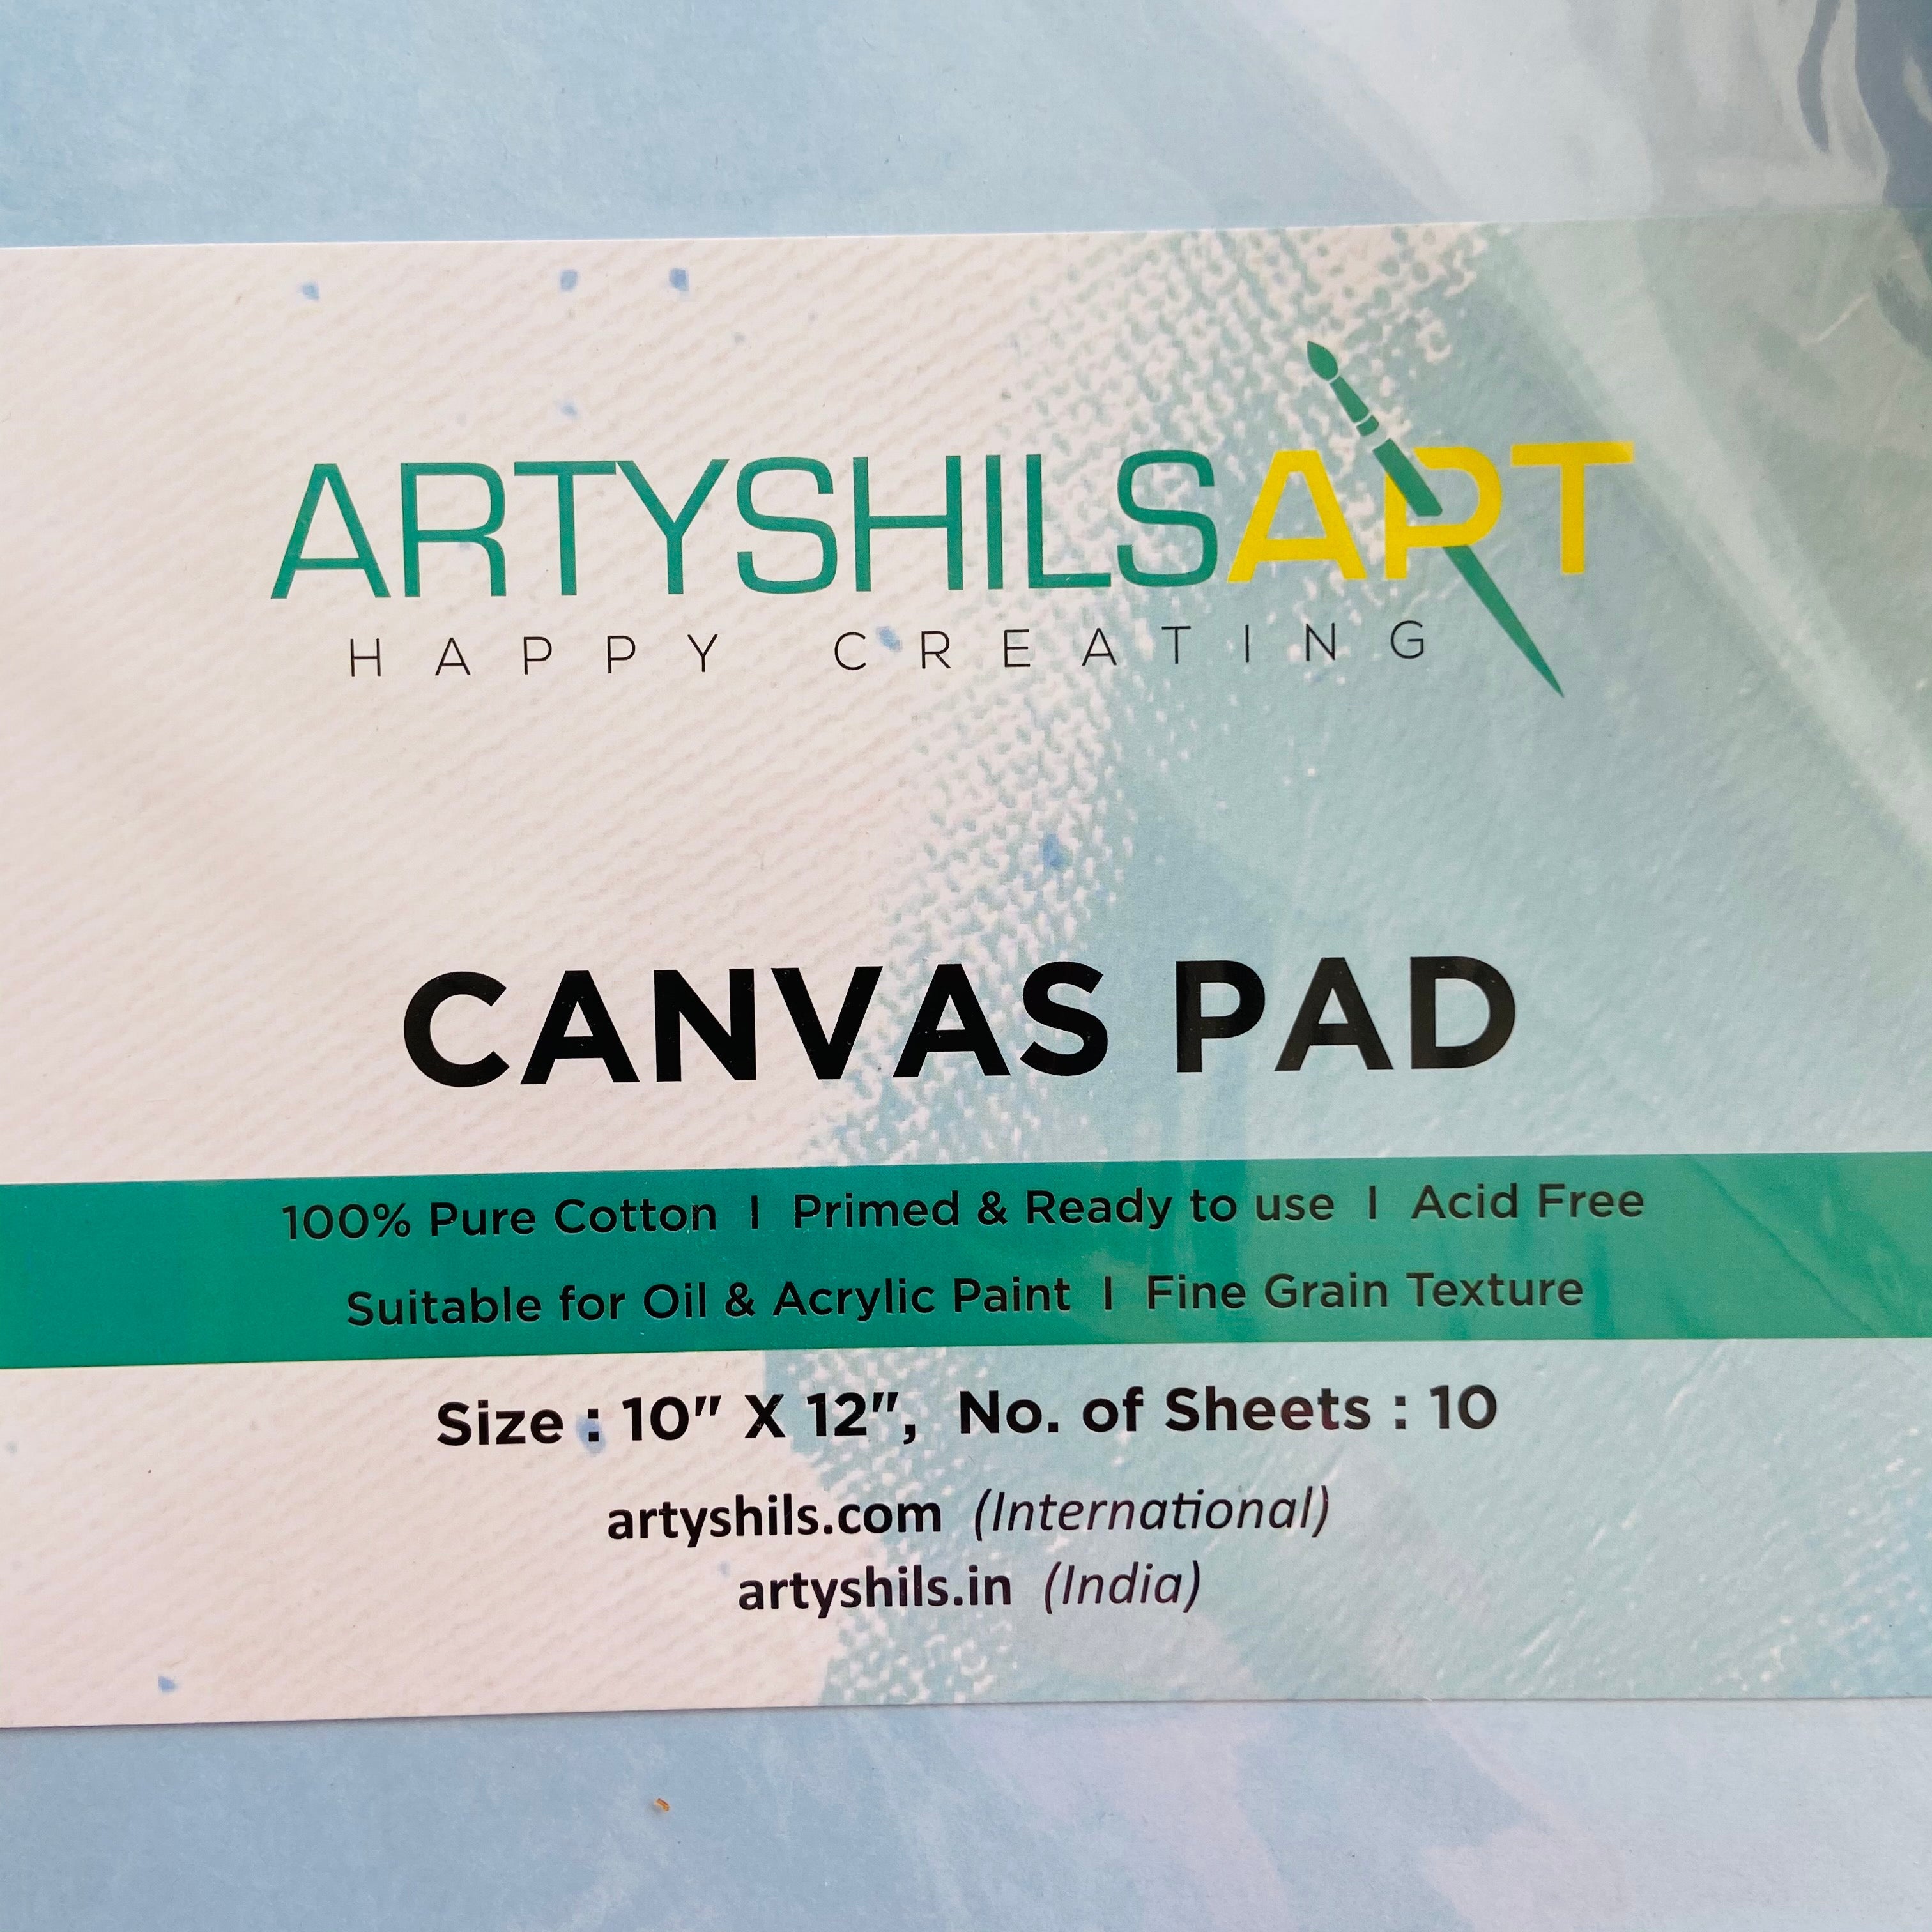 Fine Art Cotton Acrylic Painting Canvas Pad (12 X 16 Inch) - Starbox